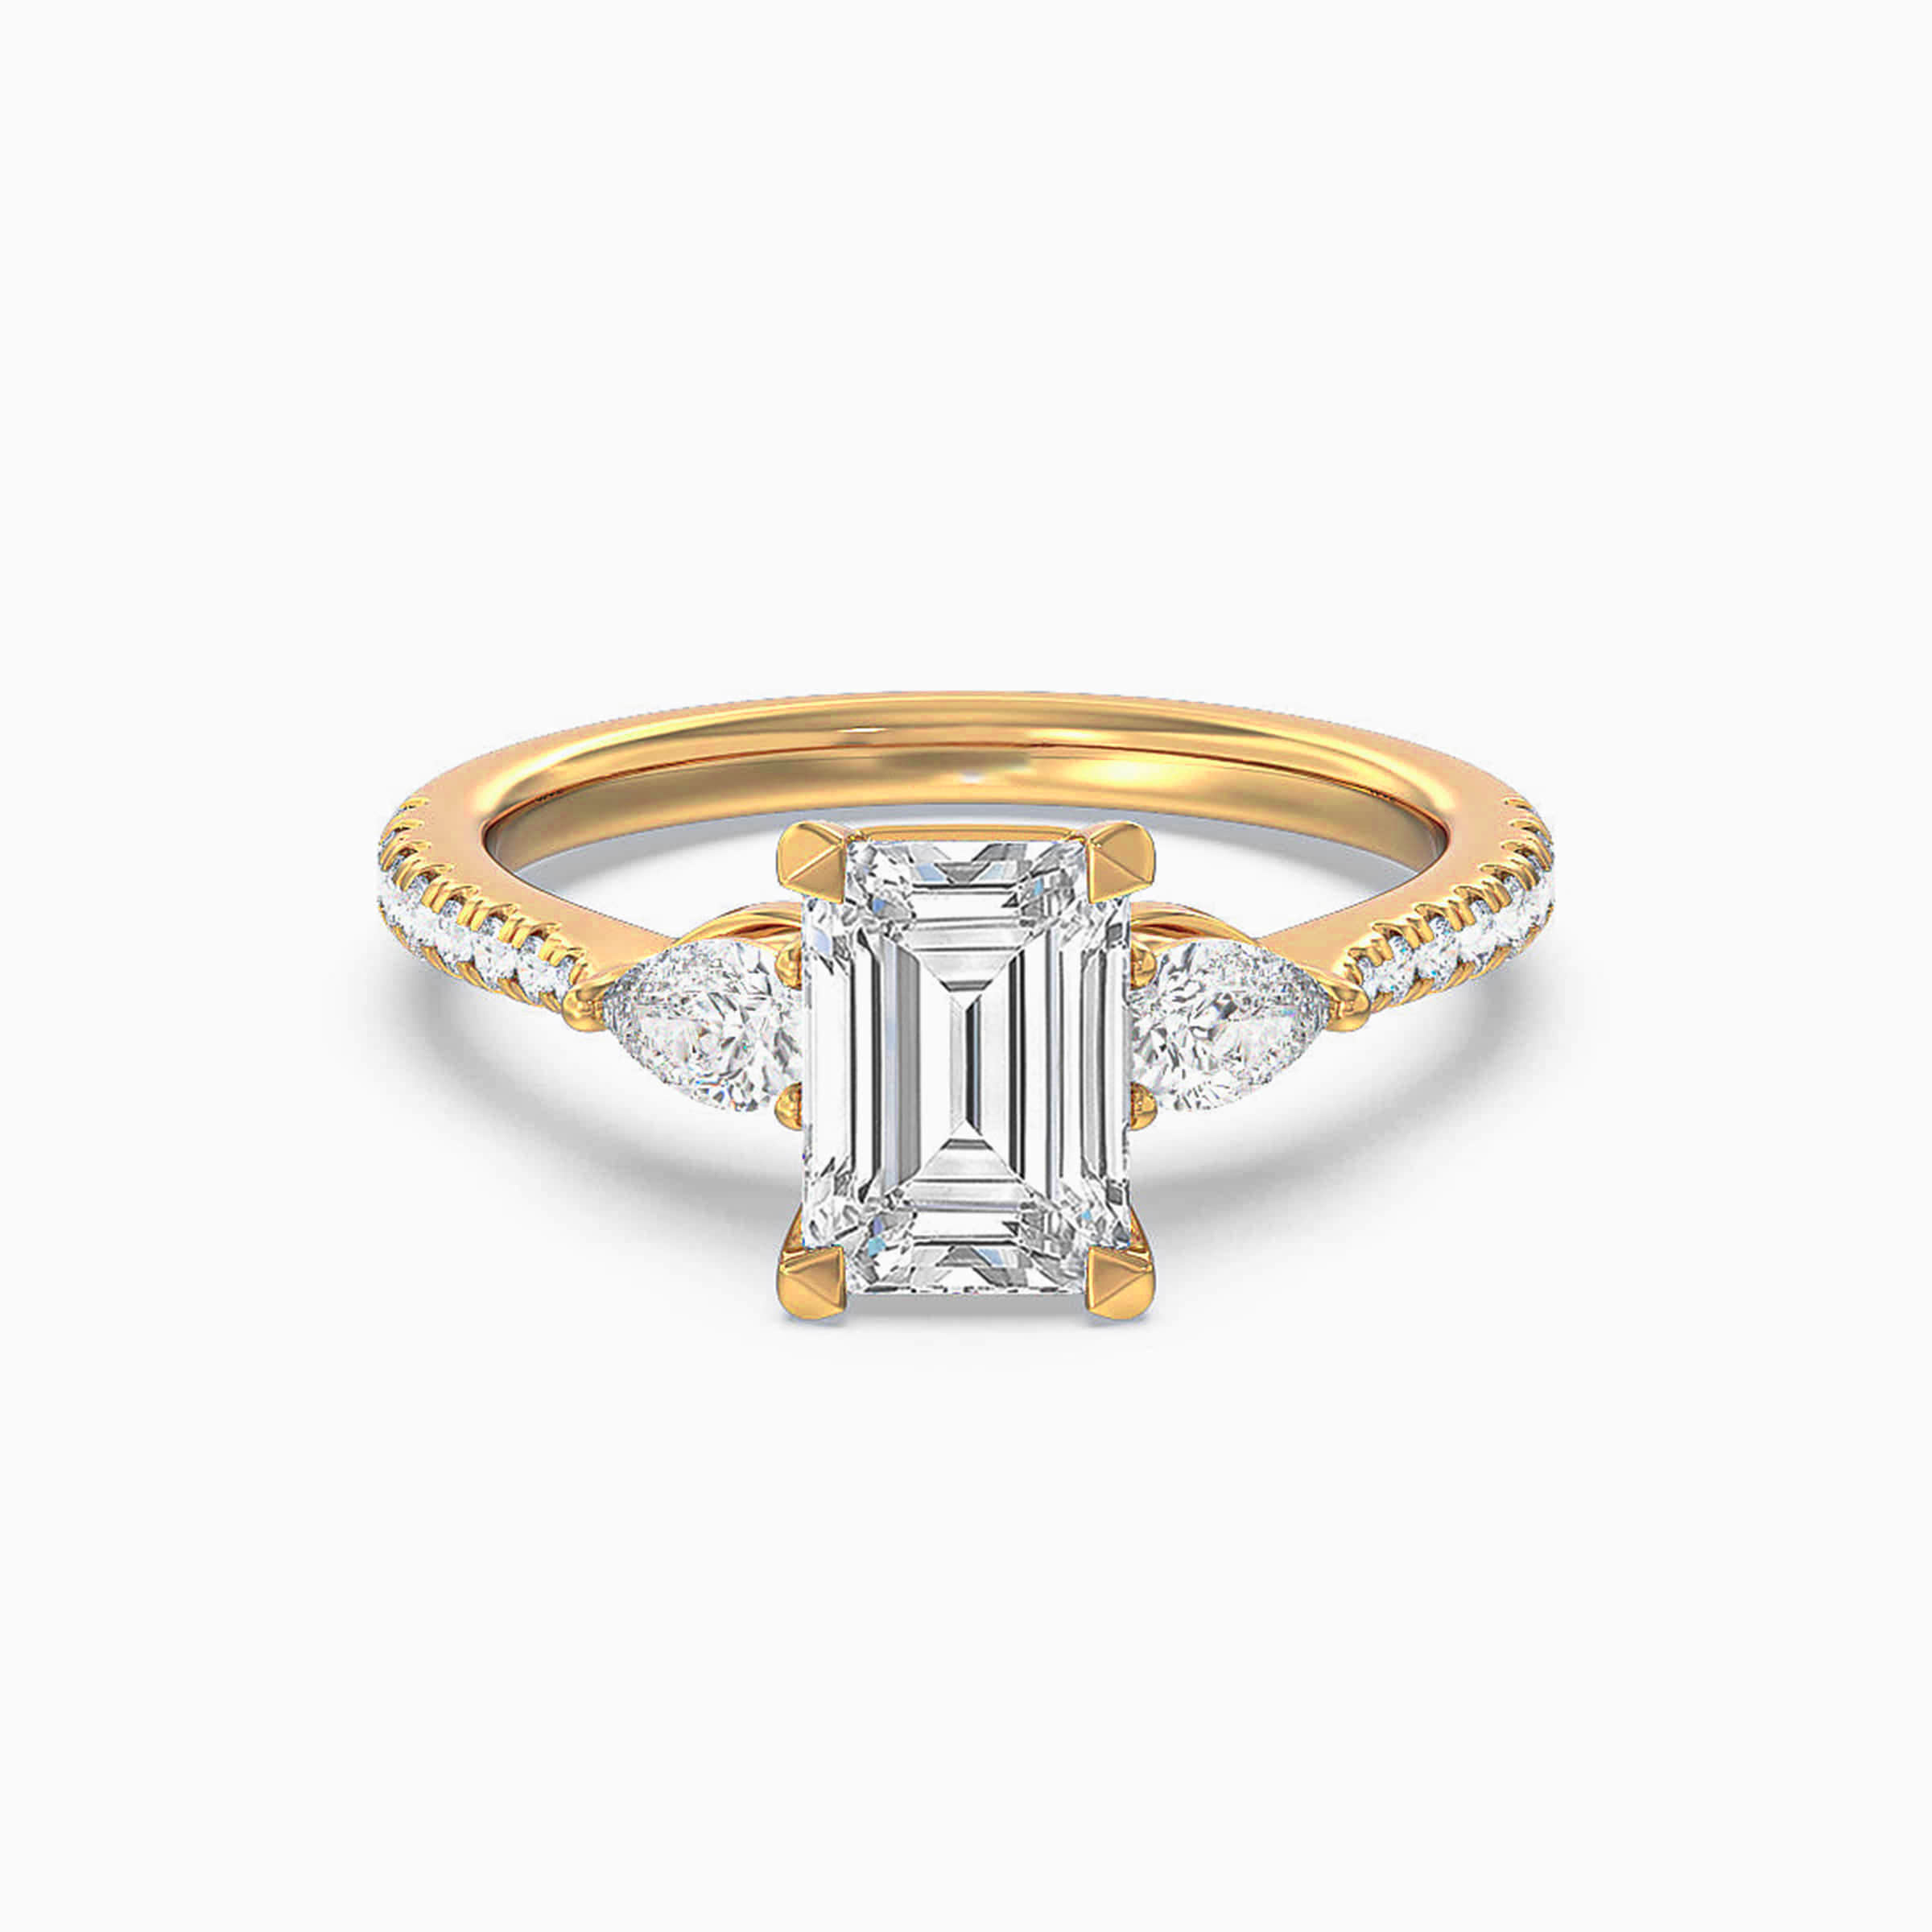 Darry Ring three stone emerald cut engagement ring yellow gold